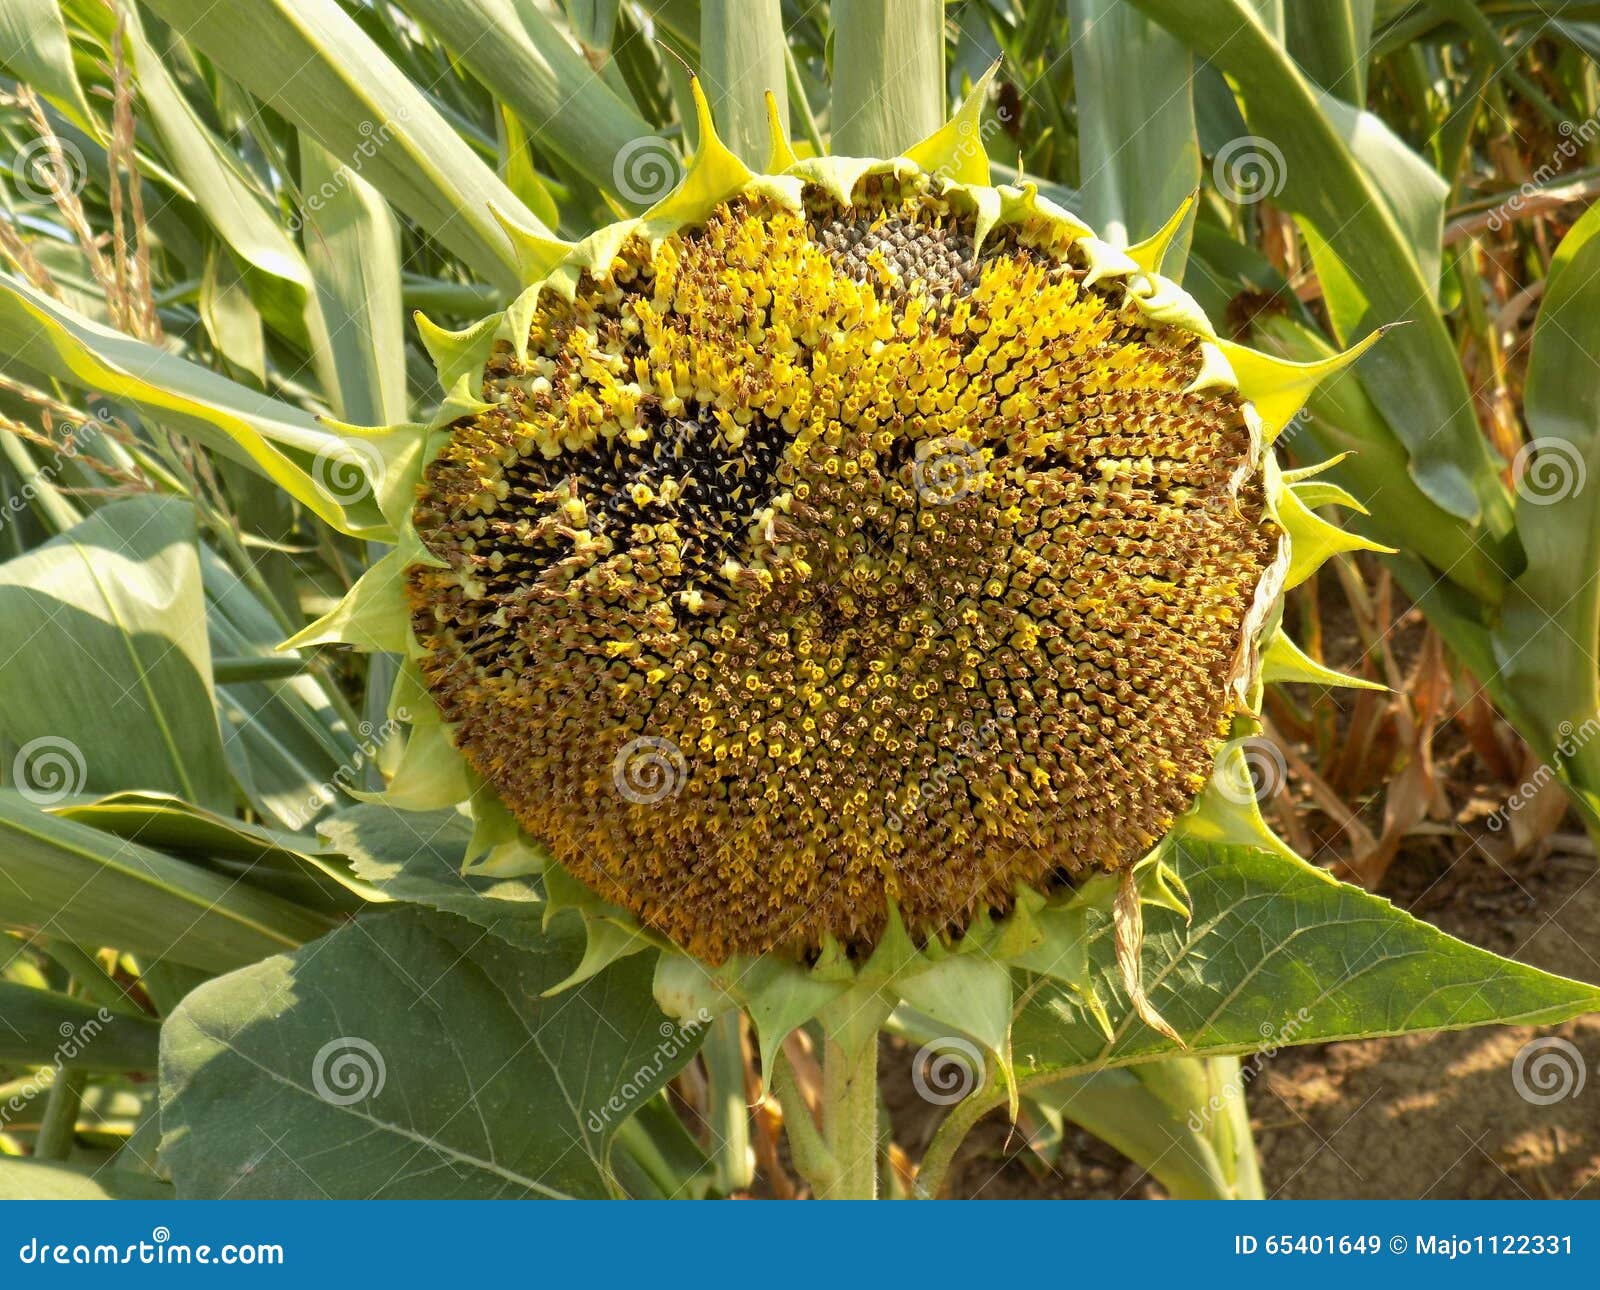 Old Sunflower stock image. Image of flora, grow, nature - 65401649